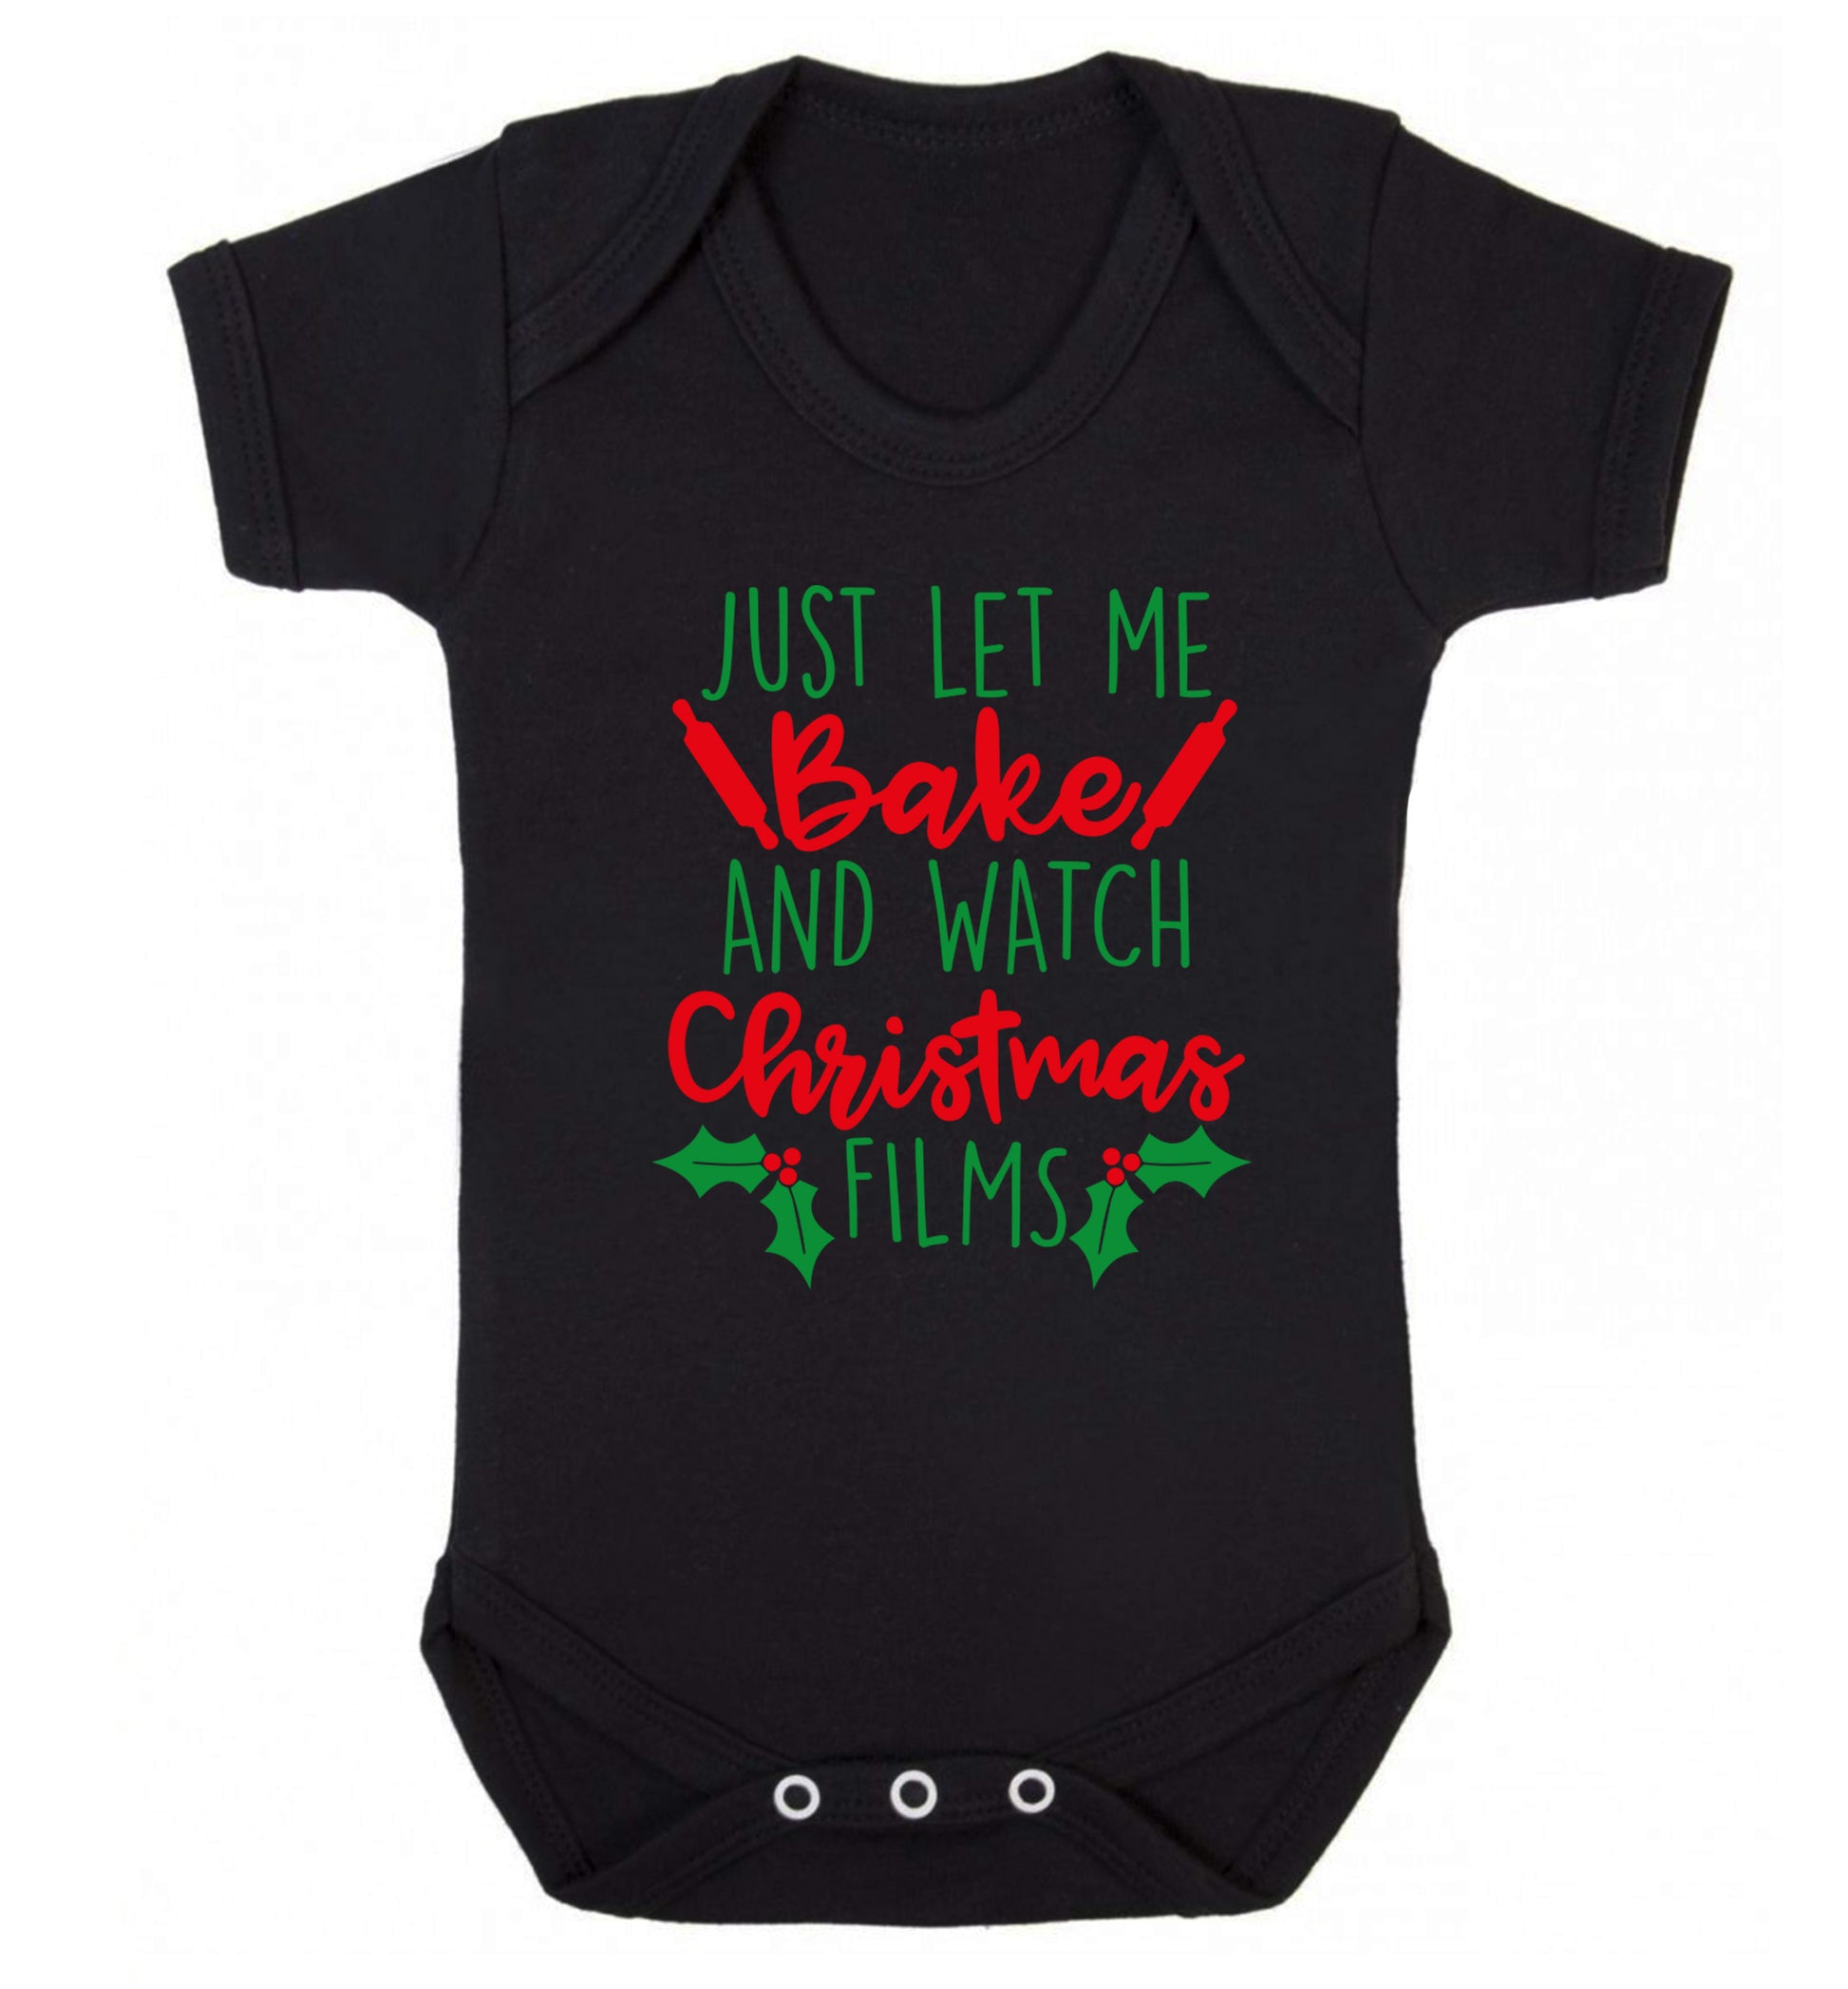 Just let me bake and watch Christmas films Baby Vest black 18-24 months